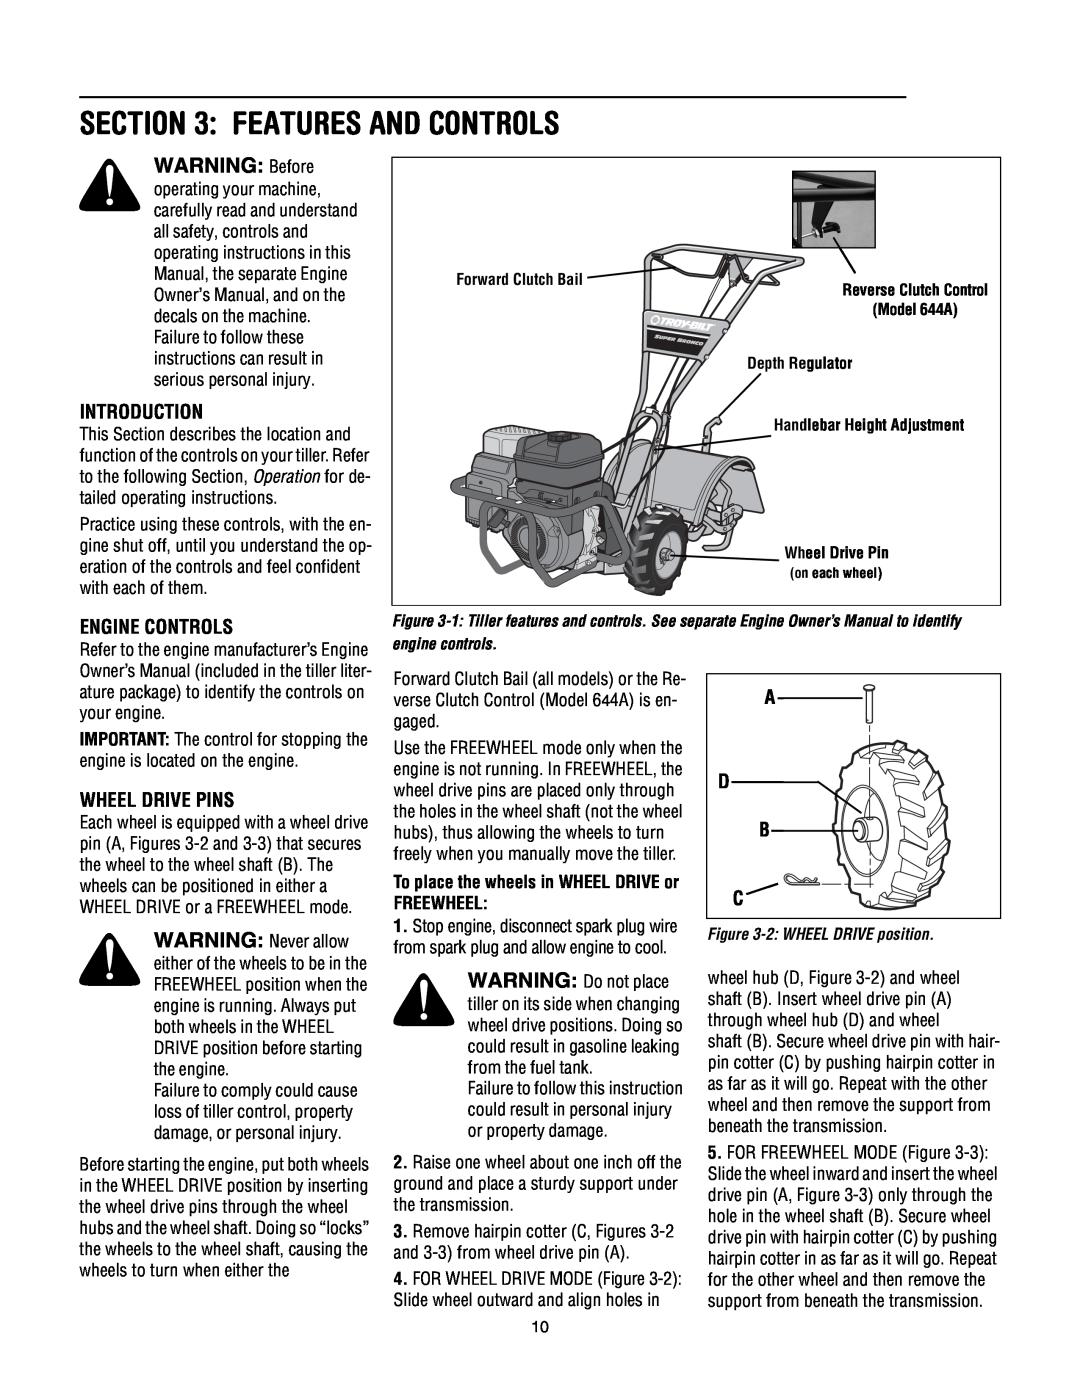 Troy-Bilt 640C-Tuffy CRT Features And Controls, WARNING Before, Introduction, Engine Controls, Wheel Drive Pins, A D B C 